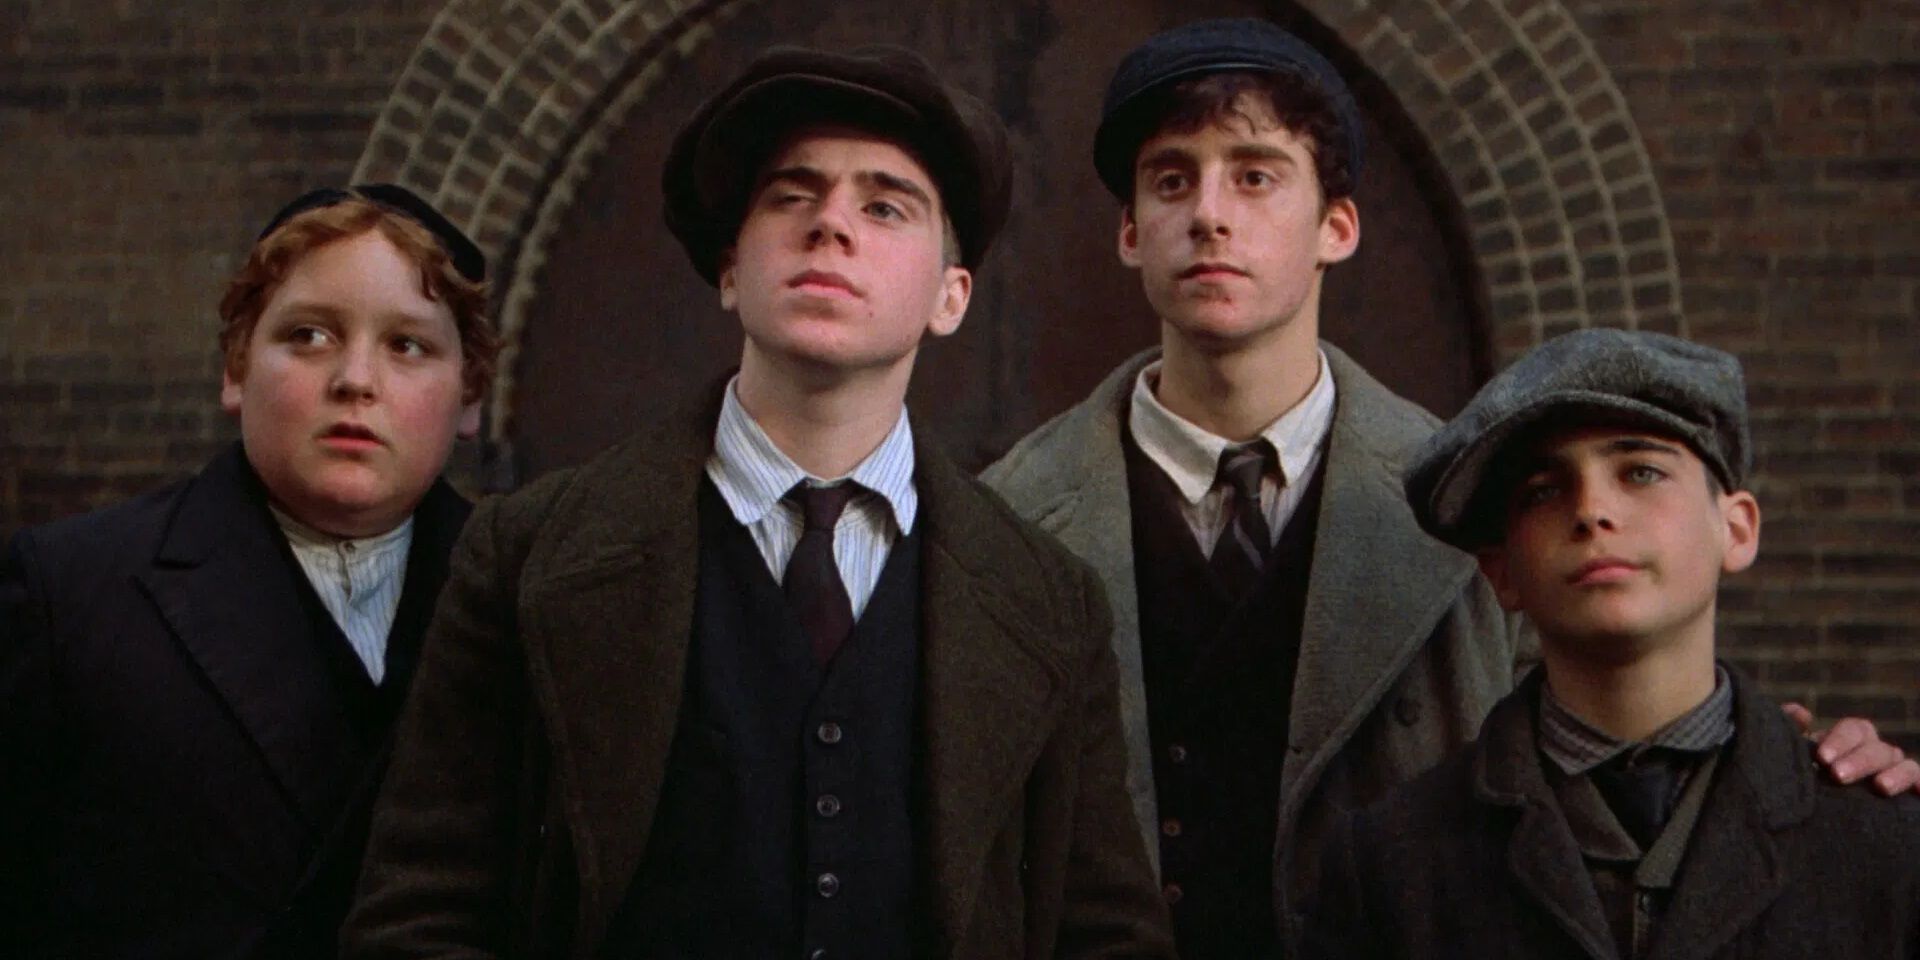 The young cast of Once Upon a Time in America standing in old style costumes